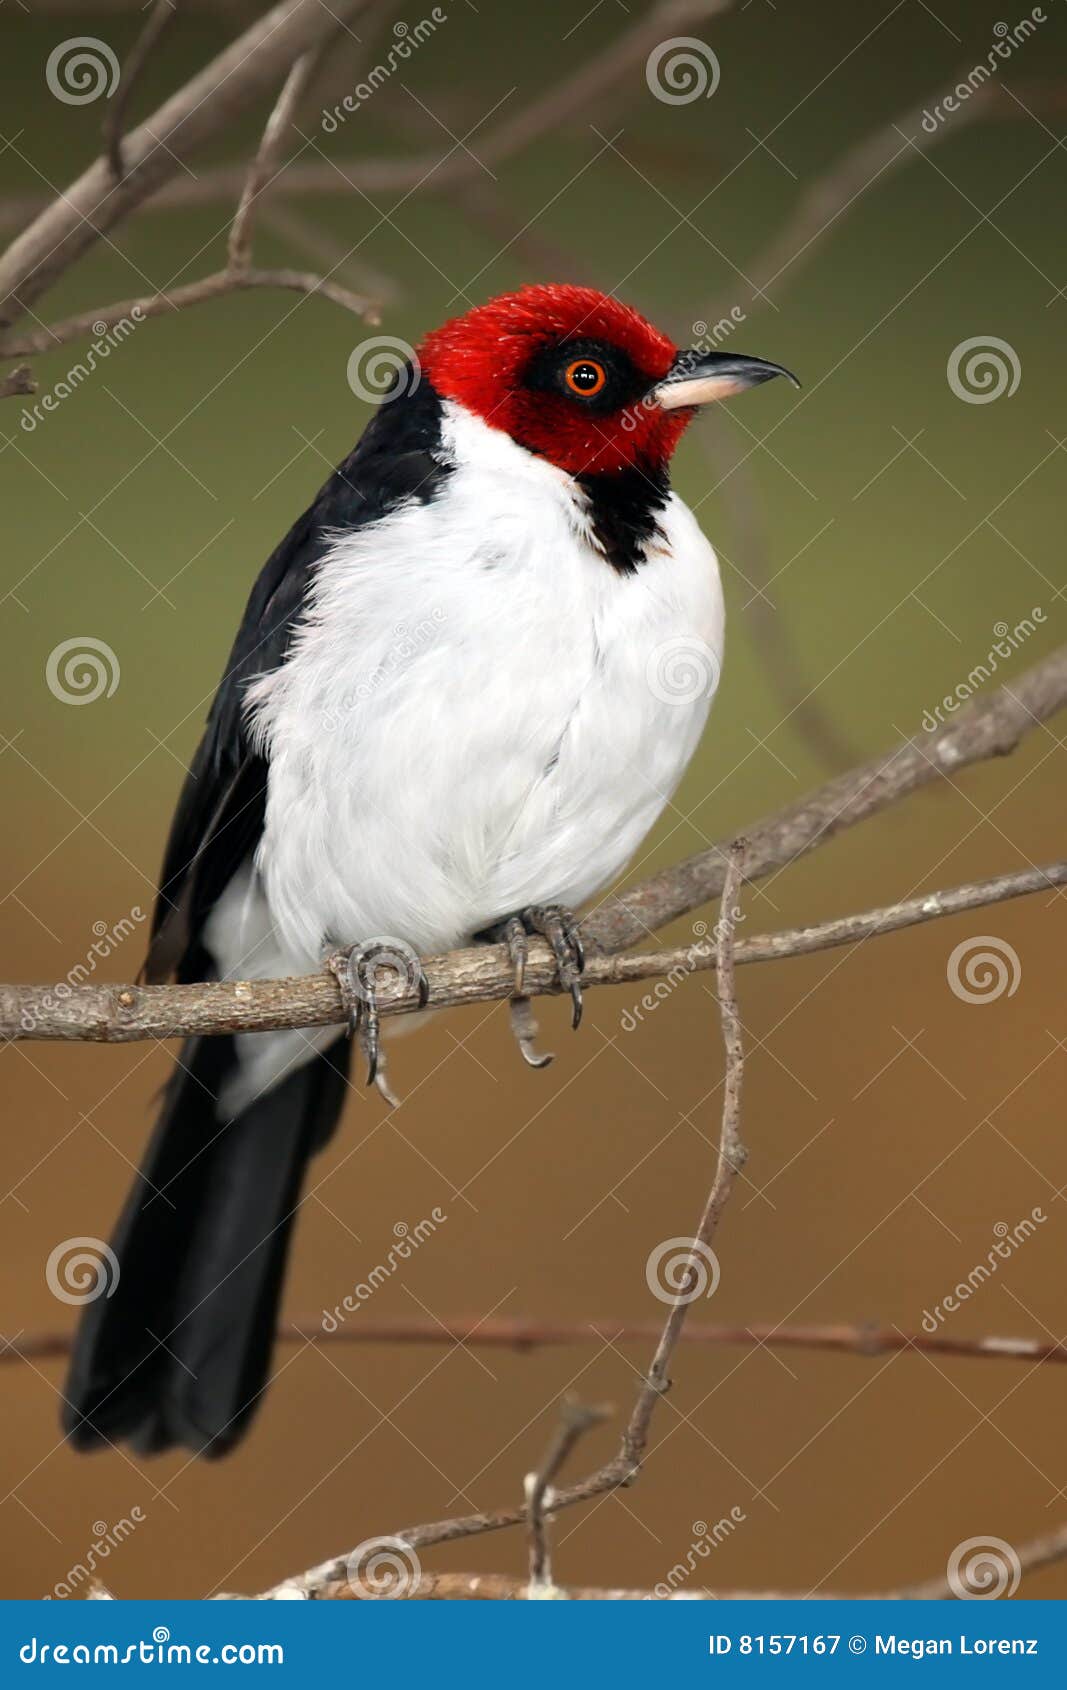 red-capped cardinal